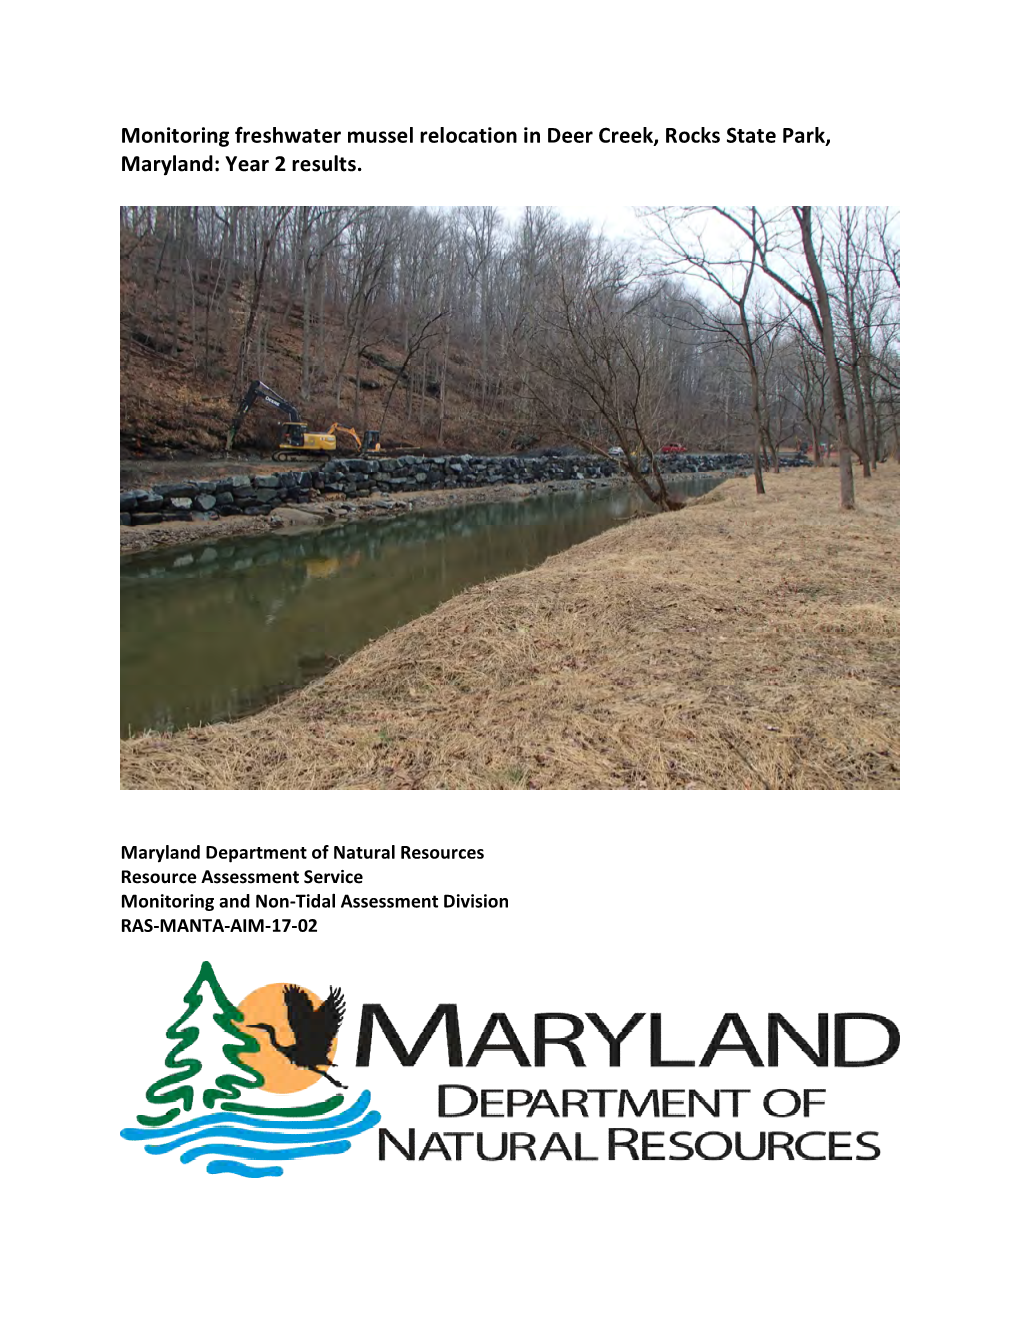 Monitoring Freshwater Mussel Relocation in Deer Creek, Rocks State Park, Maryland: Year 2 Results